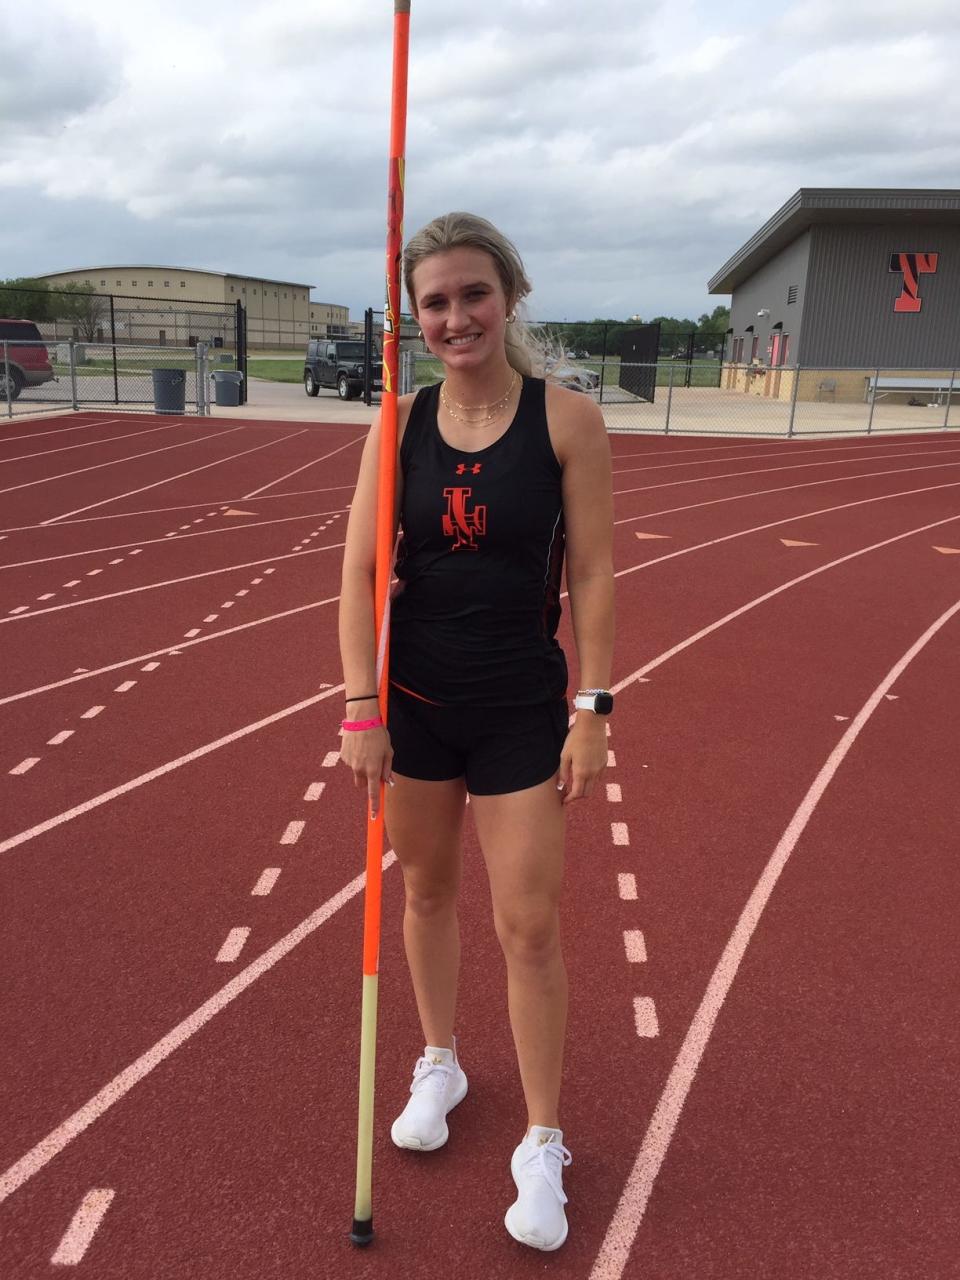 Smithville's Nikolette Schmidt captured first place in the pole vault at the Class 4A Region IV meet with a mark of 11 feet, 6 inches to qualify for this weekend's state track and field meet.